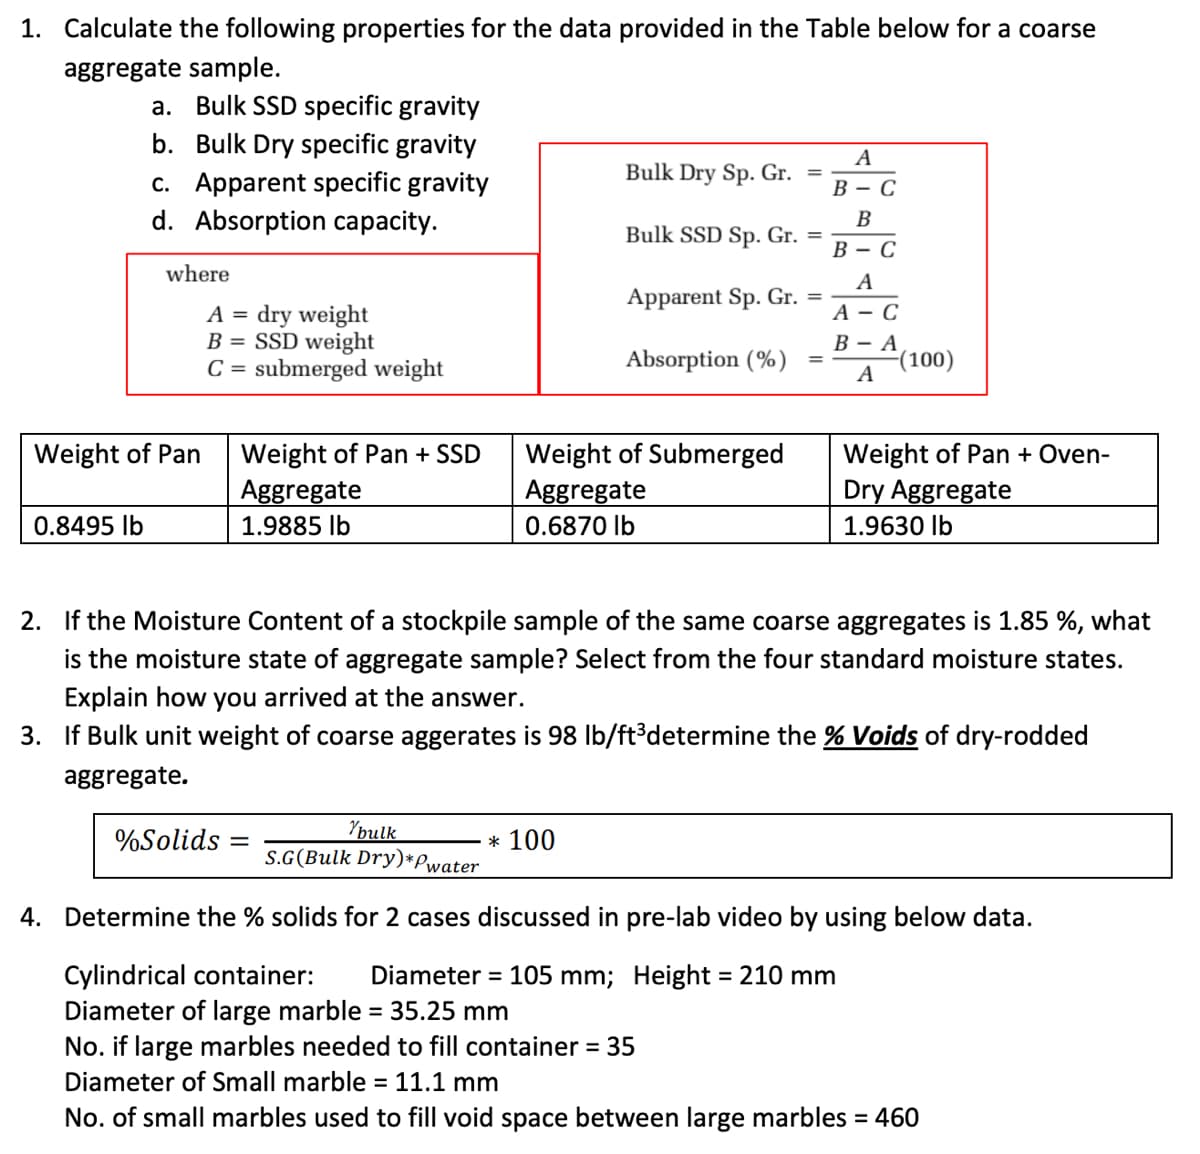 1. Calculate the following properties for the data provided in the Table below for a coarse
aggregate sample.
a. Bulk SSD specific gravity
b. Bulk Dry specific gravity
A
Bulk Dry Sp. Gr. =
c. Apparent specific gravity
d. Absorption capacity.
В — С
B
Bulk SSD Sp. Gr. =
В — С
where
A
Apparent Sp. Gr. =
А — С
A = dry weight
B = SSD weight
C = submerged weight
В — А
(100)
A
Absorption (%)
Weight of Pan + Oven-
Dry Aggregate
Weight of Pan
Weight of Submerged
Aggregate
Weight of Pan + SD
Aggregate
0.8495 Ib
1.9885 lb
0.6870 lb
1.9630 Ib
2. If the Moisture Content of a stockpile sample of the same coarse aggregates is 1.85 %, what
is the moisture state of aggregate sample? Select from the four standard moisture states.
Explain how you arrived at the answer.
3. If Bulk unit weight of coarse aggerates is 98 Ib/ft³determine the % Voids of dry-rodded
aggregate.
Youlk
S.G(Bulk Dry)*Pwater
%Solids
* 100
4. Determine the % solids for 2 cases discussed in pre-lab video by using below data.
Cylindrical container:
Diameter of large marble = 35.25 mm
No. if large marbles needed to fill container = 35
Diameter = 105 mm; Height = 210 mm
%3D
%3D
Diameter of Small marble = 11.1 mm
%3D
No. of small marbles used to fill void space between large marbles = 460
%3D
